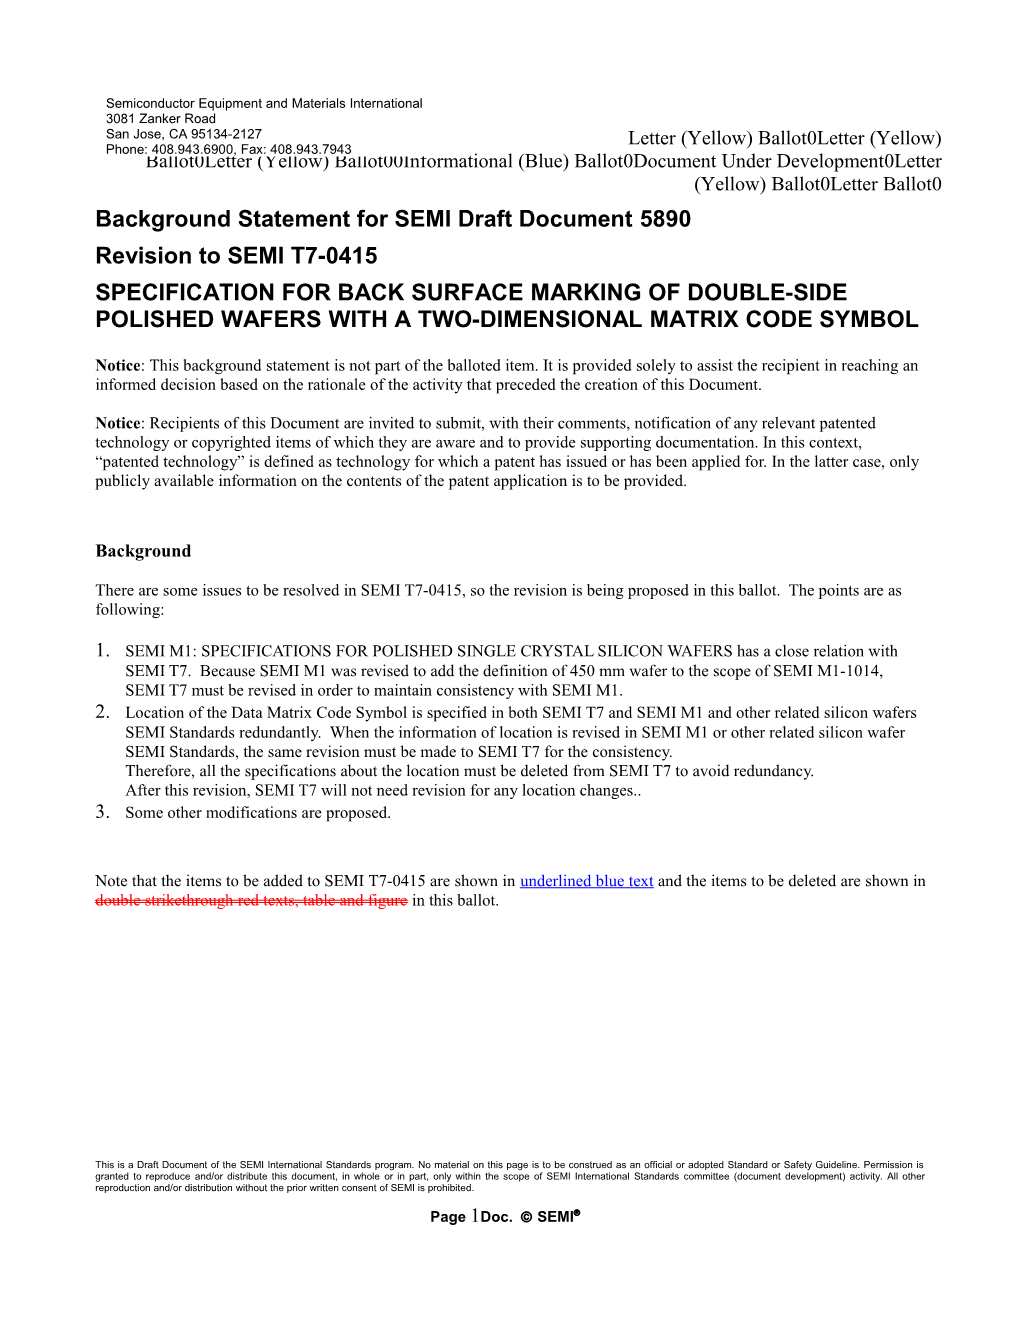 Background Statement for SEMI Draft Document 5890